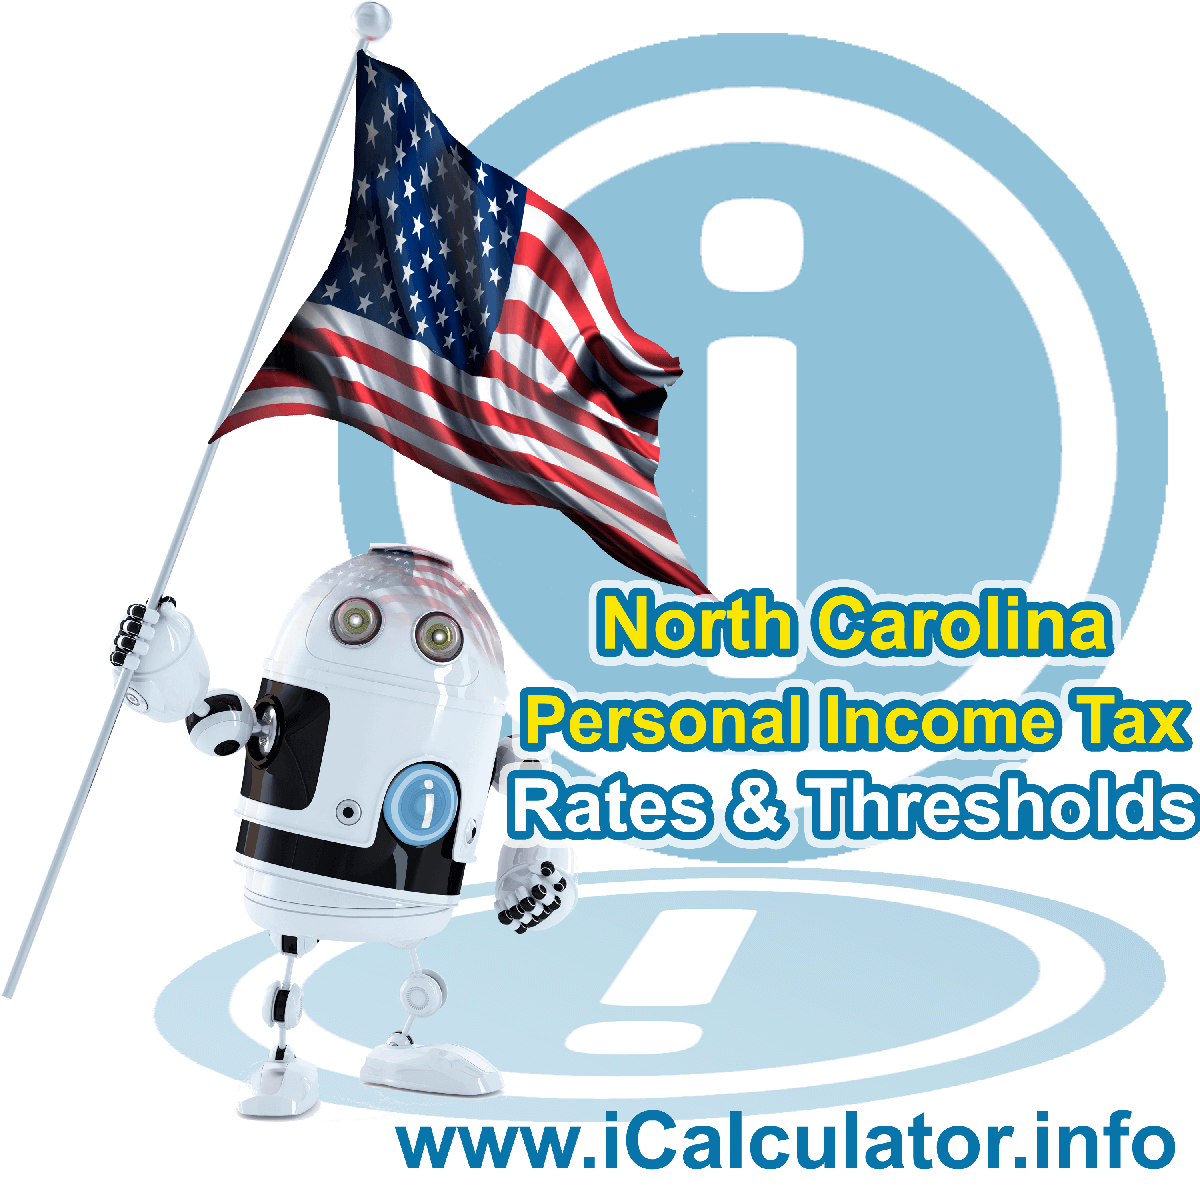 North Carolina State Tax Tables 2016. This image displays details of the North Carolina State Tax Tables for the 2016 tax return year which is provided in support of the 2016 US Tax Calculator